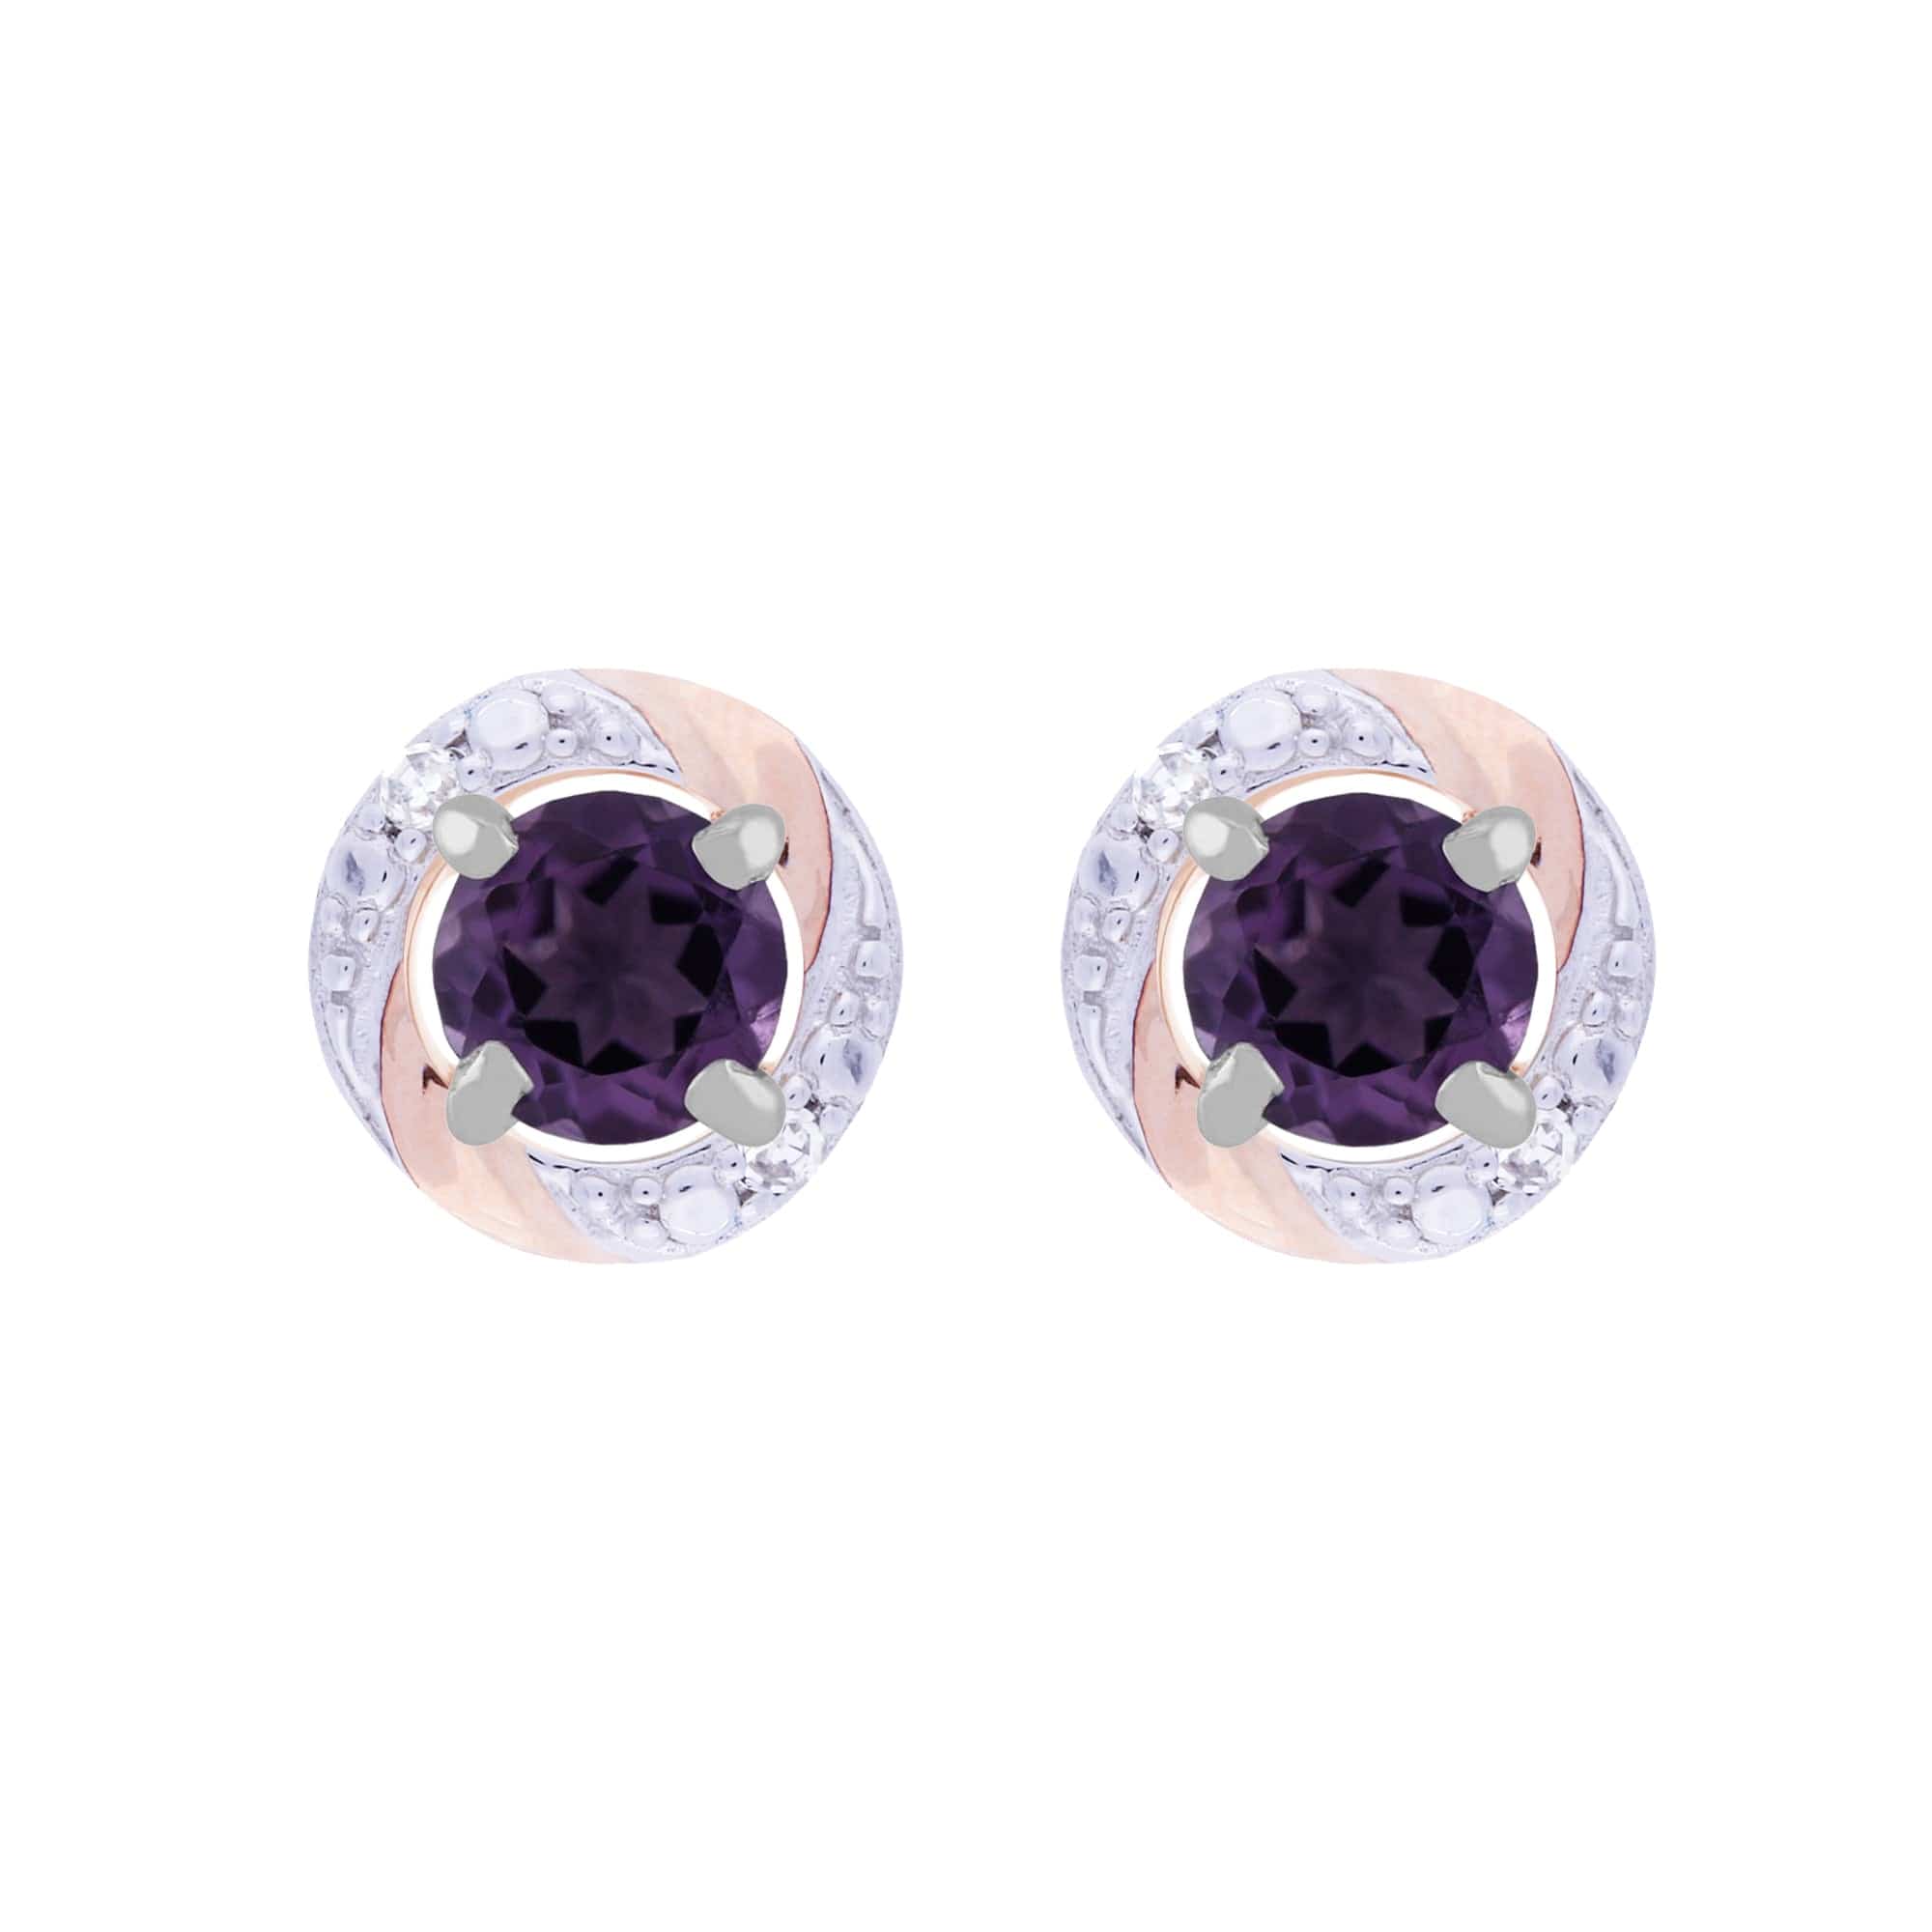 Classic Round Amethyst Stud Earrings with Detachable Diamond Round Earrings Jacket Set in 9ct White Gold - Gemondo